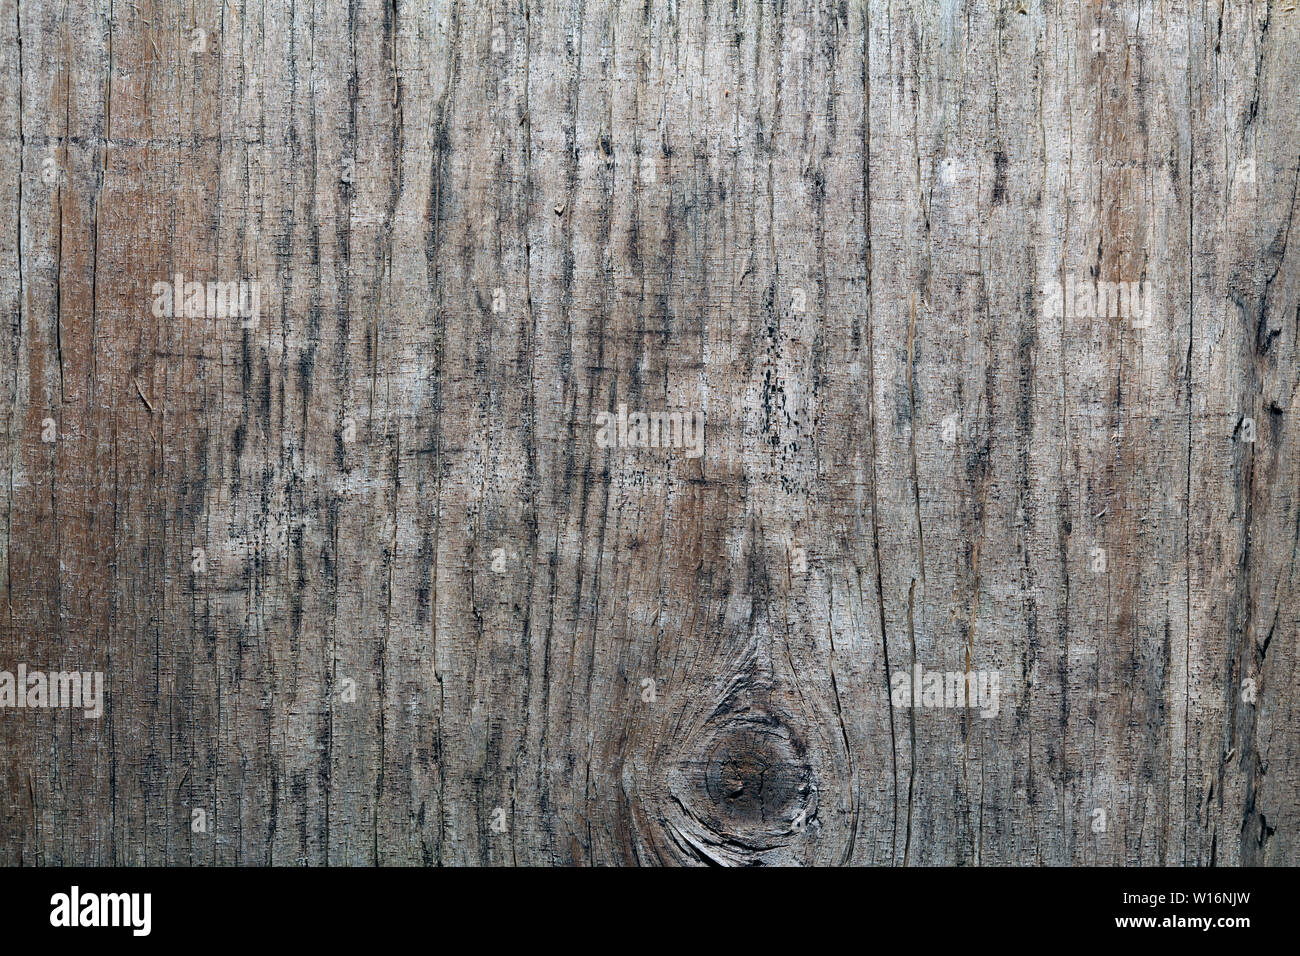 Rough wood background or texture Stock Photo